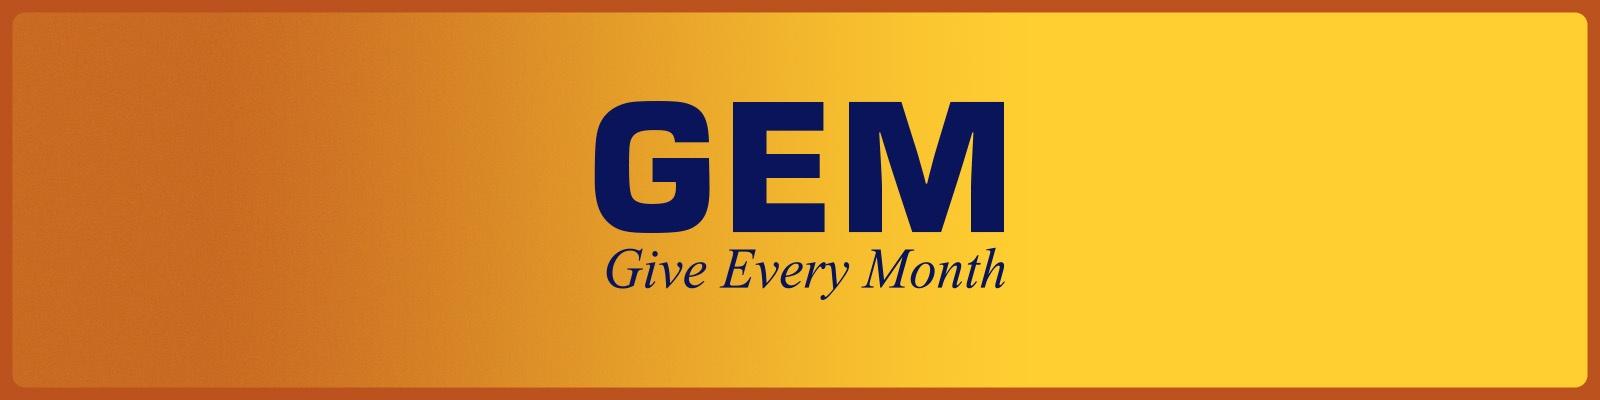 GEM - Give Every Month